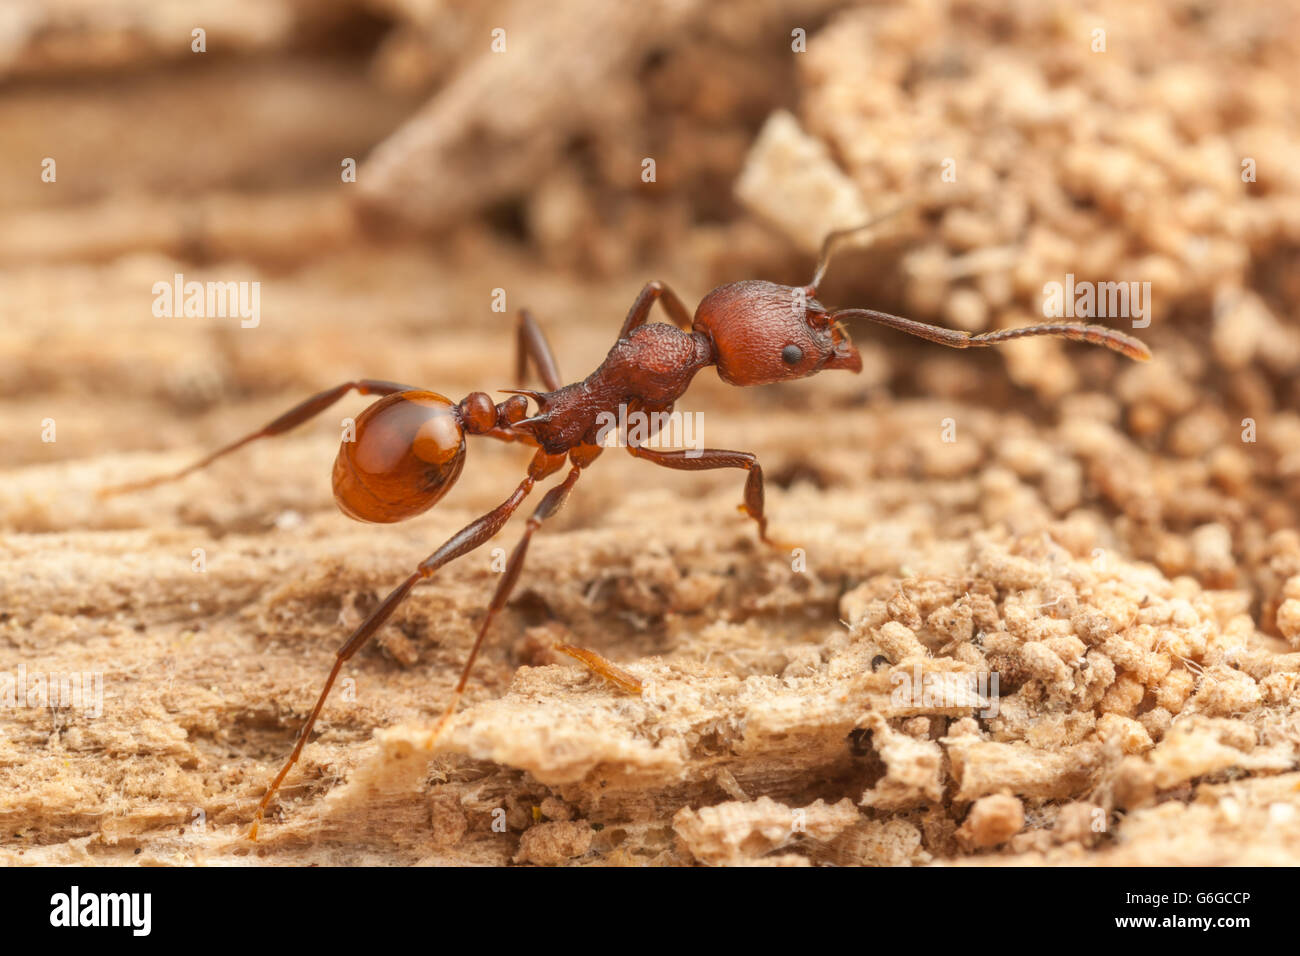 A Spine-waisted Ant (Aphaenogaster tennesseensis) worker forages for food on a fallen dead tree trunk. Stock Photo